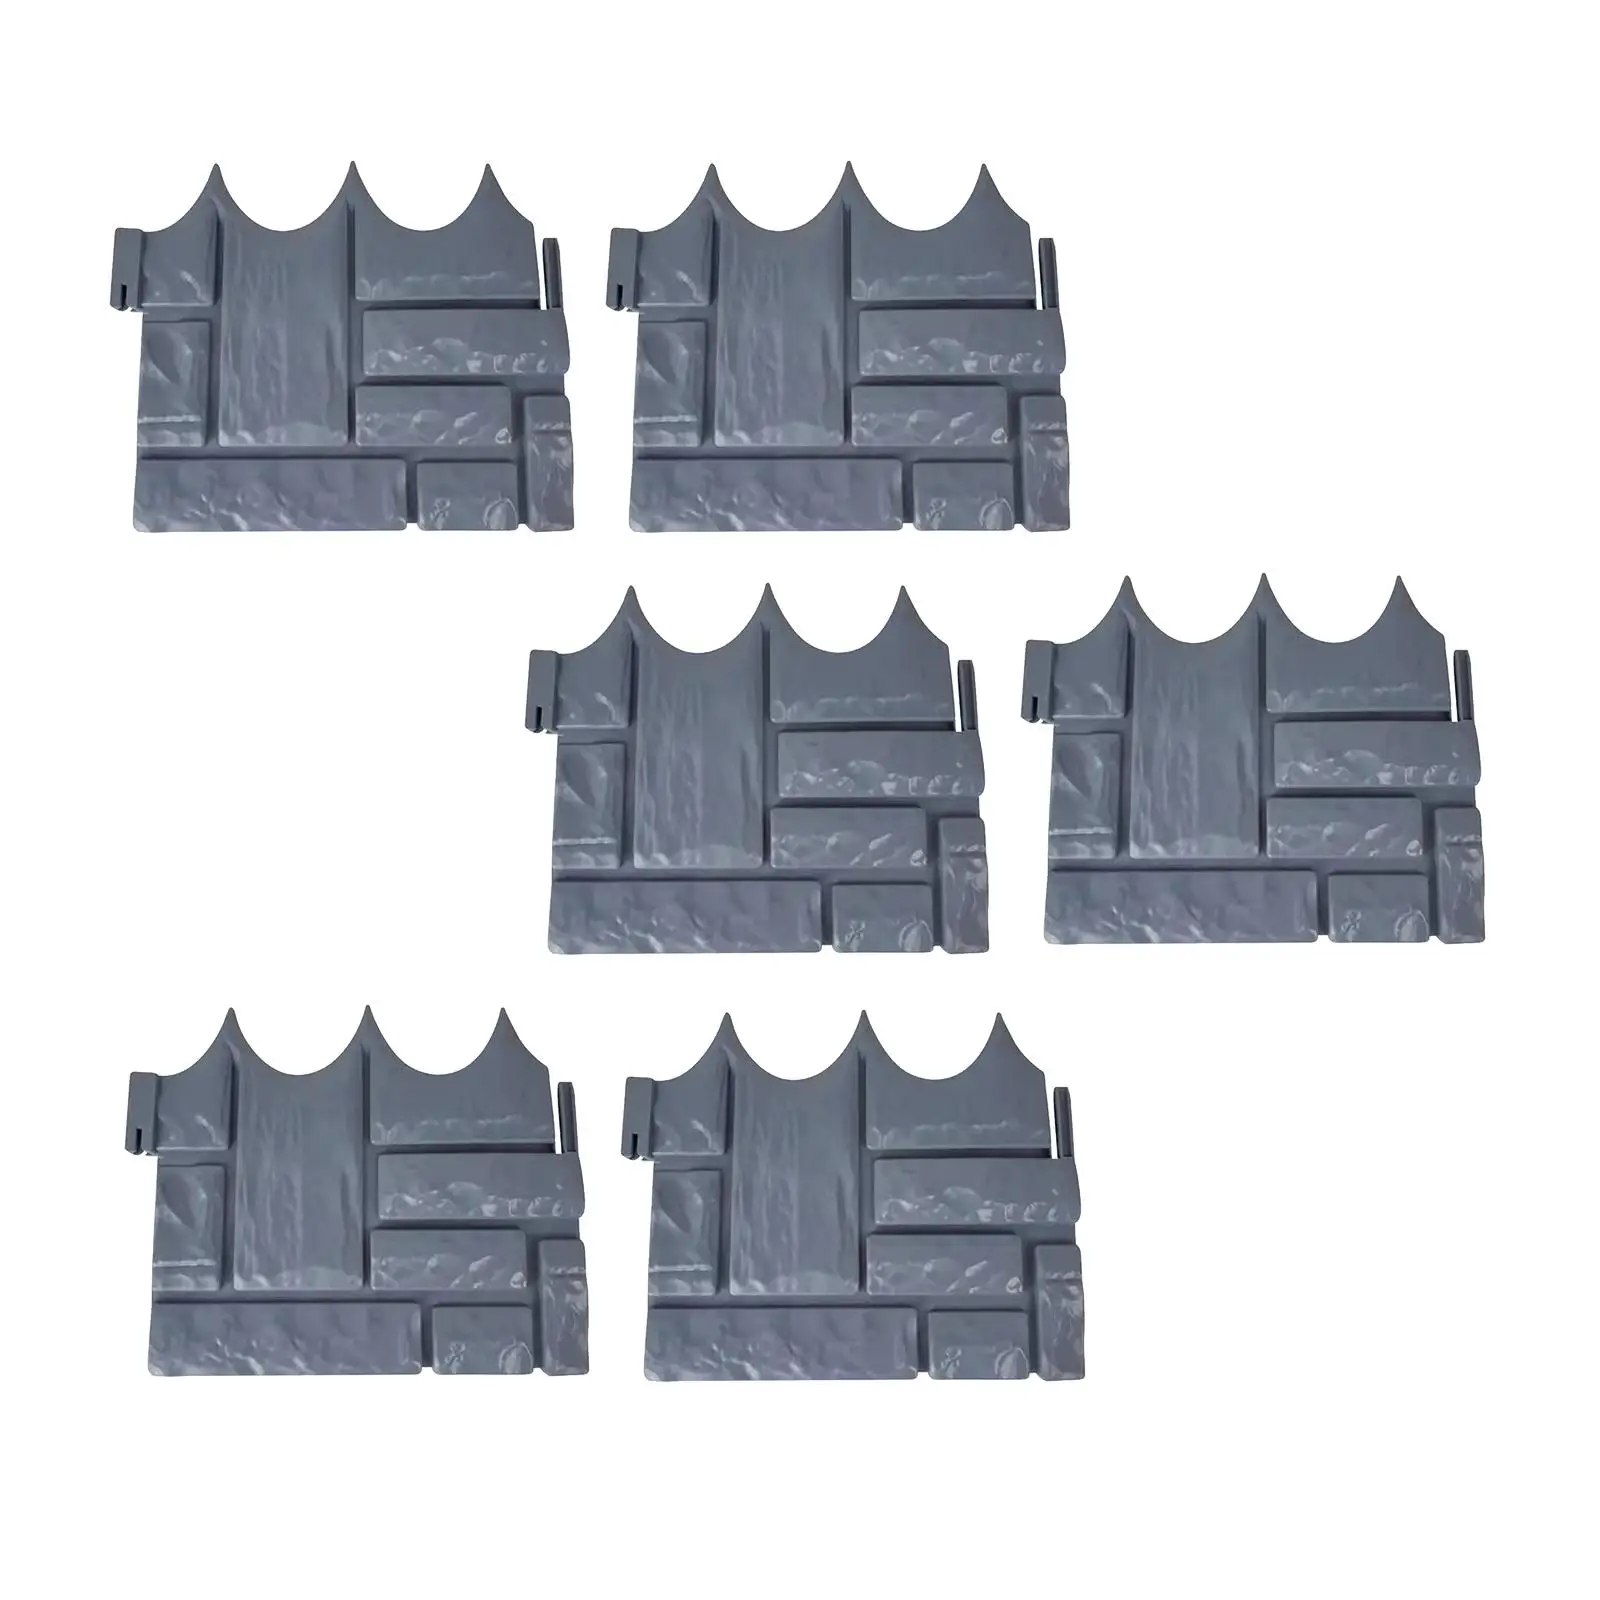 6 Pieces Garden Imitation Stone Fence Removable Reusable Esy Installation Waterproof for Lawn Patio Flower Bed Garden Ornament